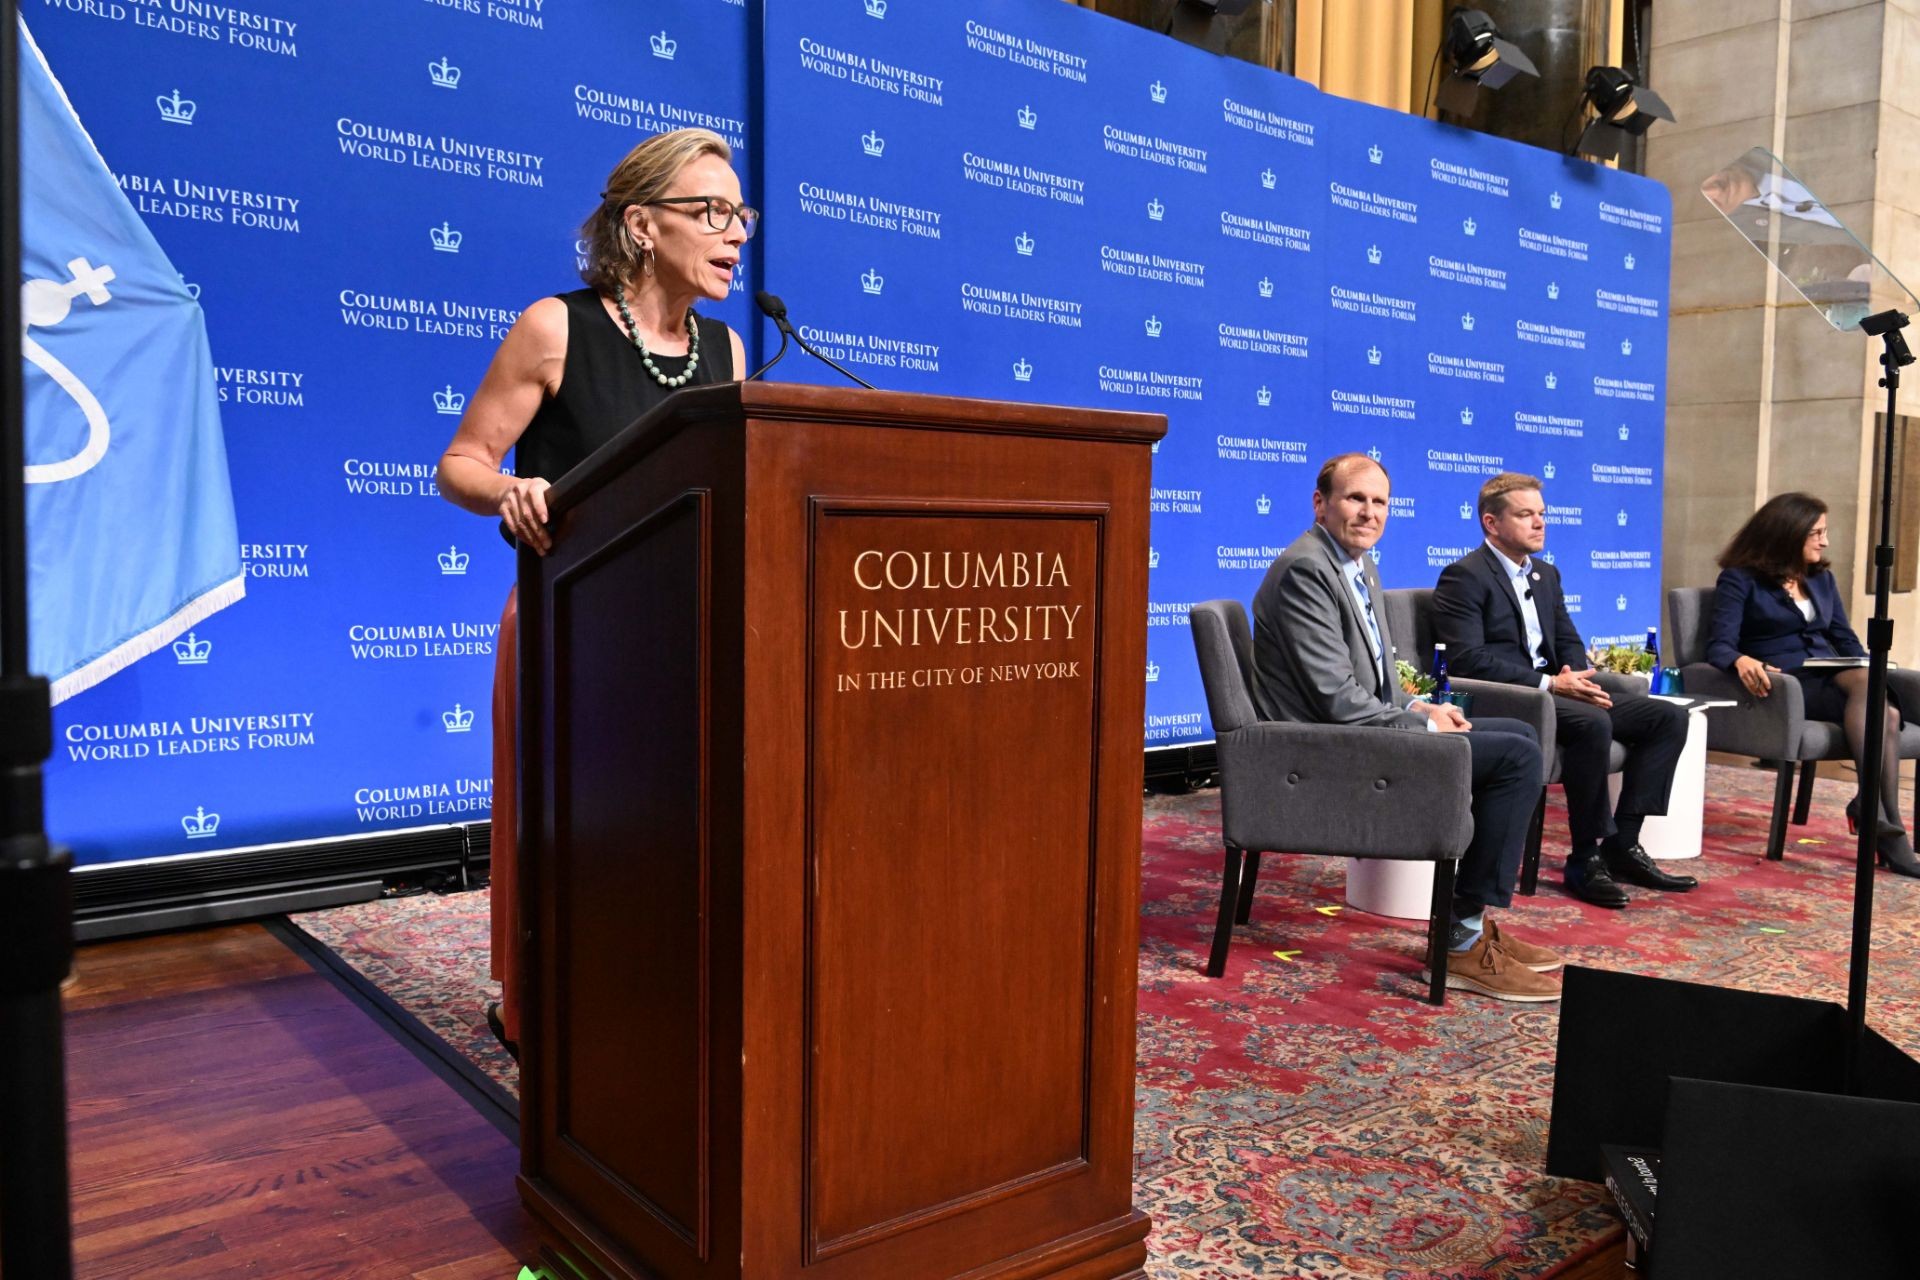 Program director of M.S. Nonprofit Management at the School of Professional Studies, Sarah Holloway speaking at the podium during the World Leaders Forum